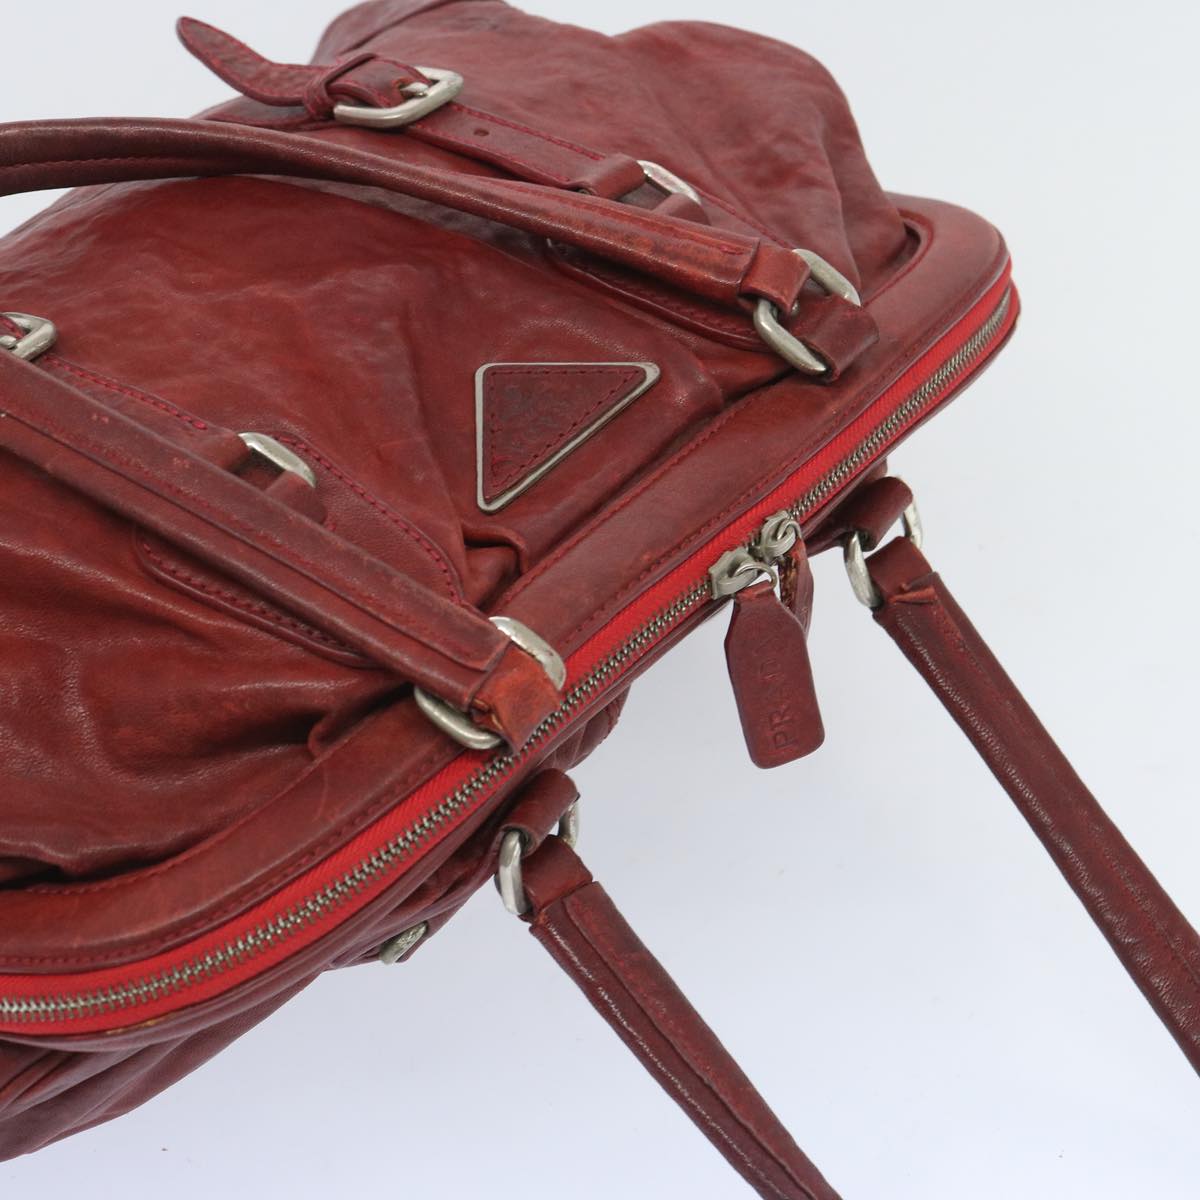 PRADA Hand Bag Leather Red Auth bs12171